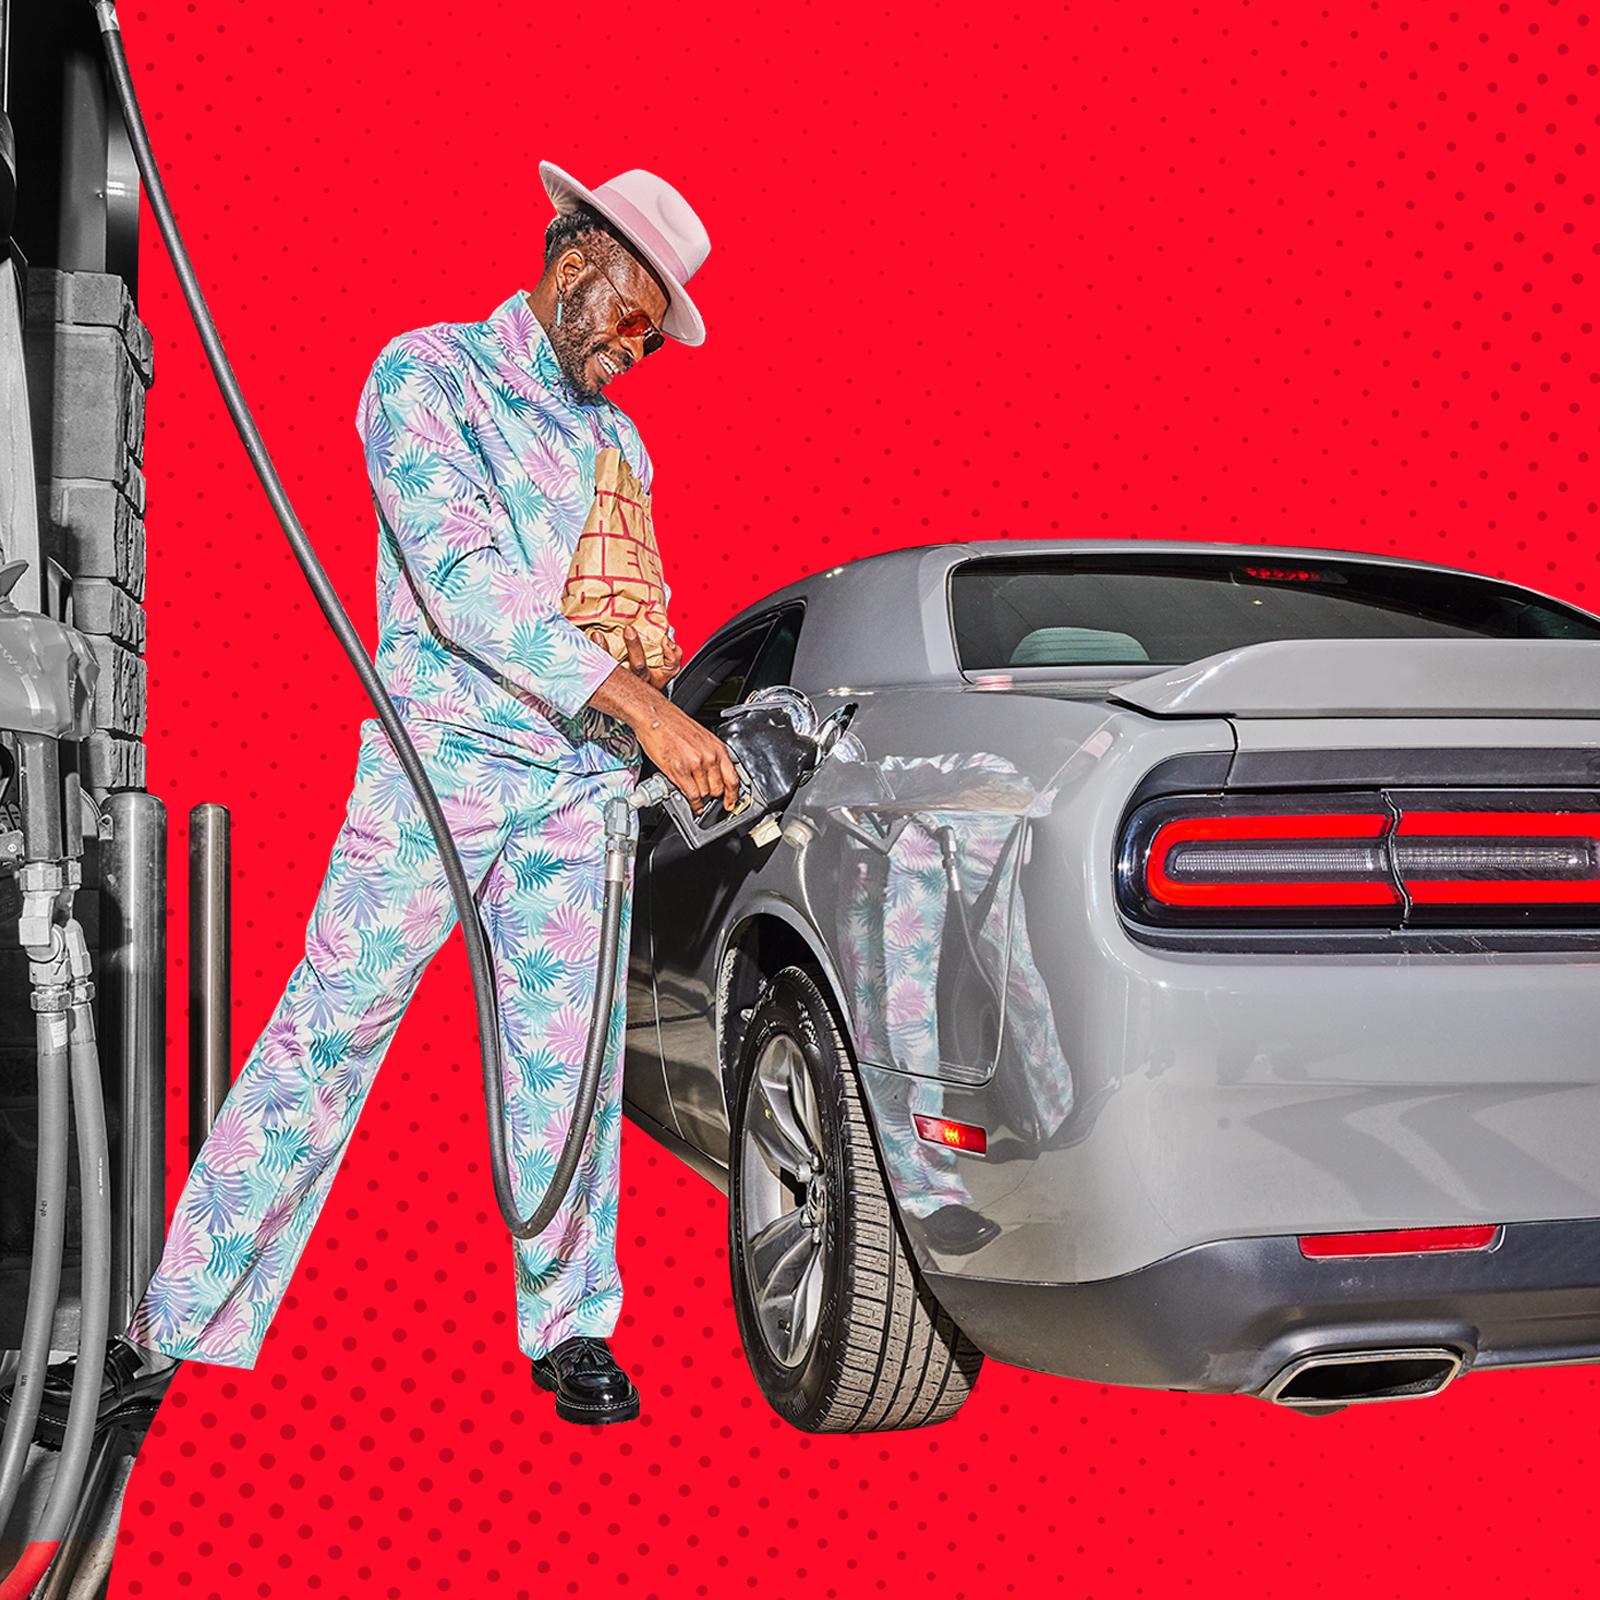 man pumping gas on a red background